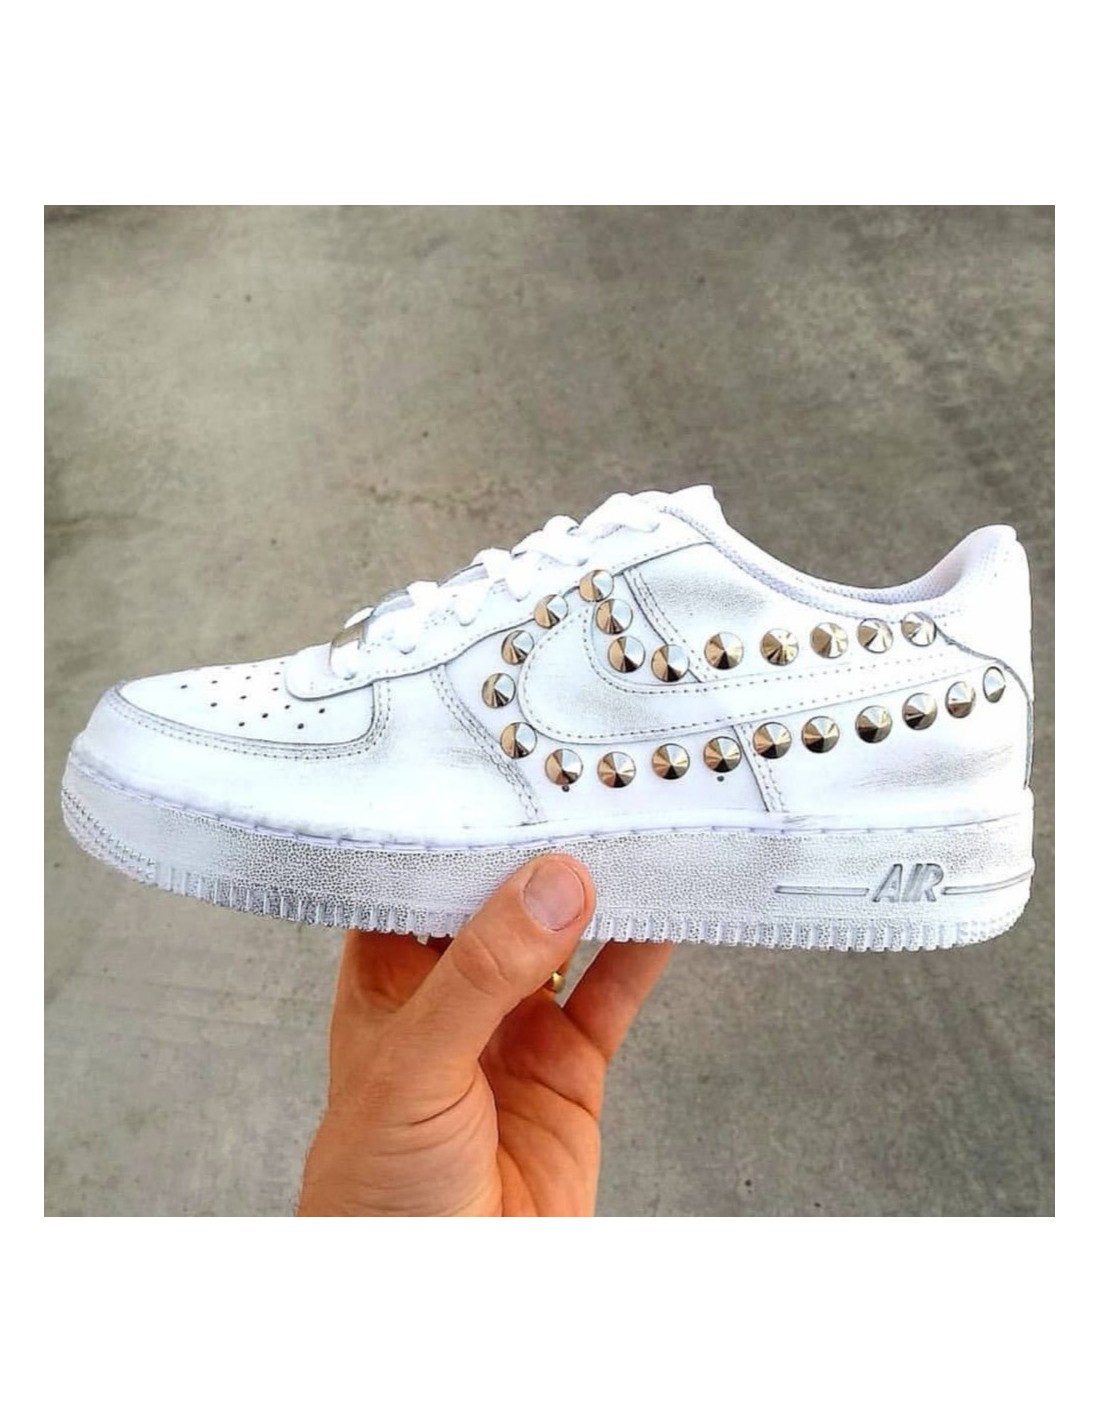 Nike Air Force One AF1 Borchie